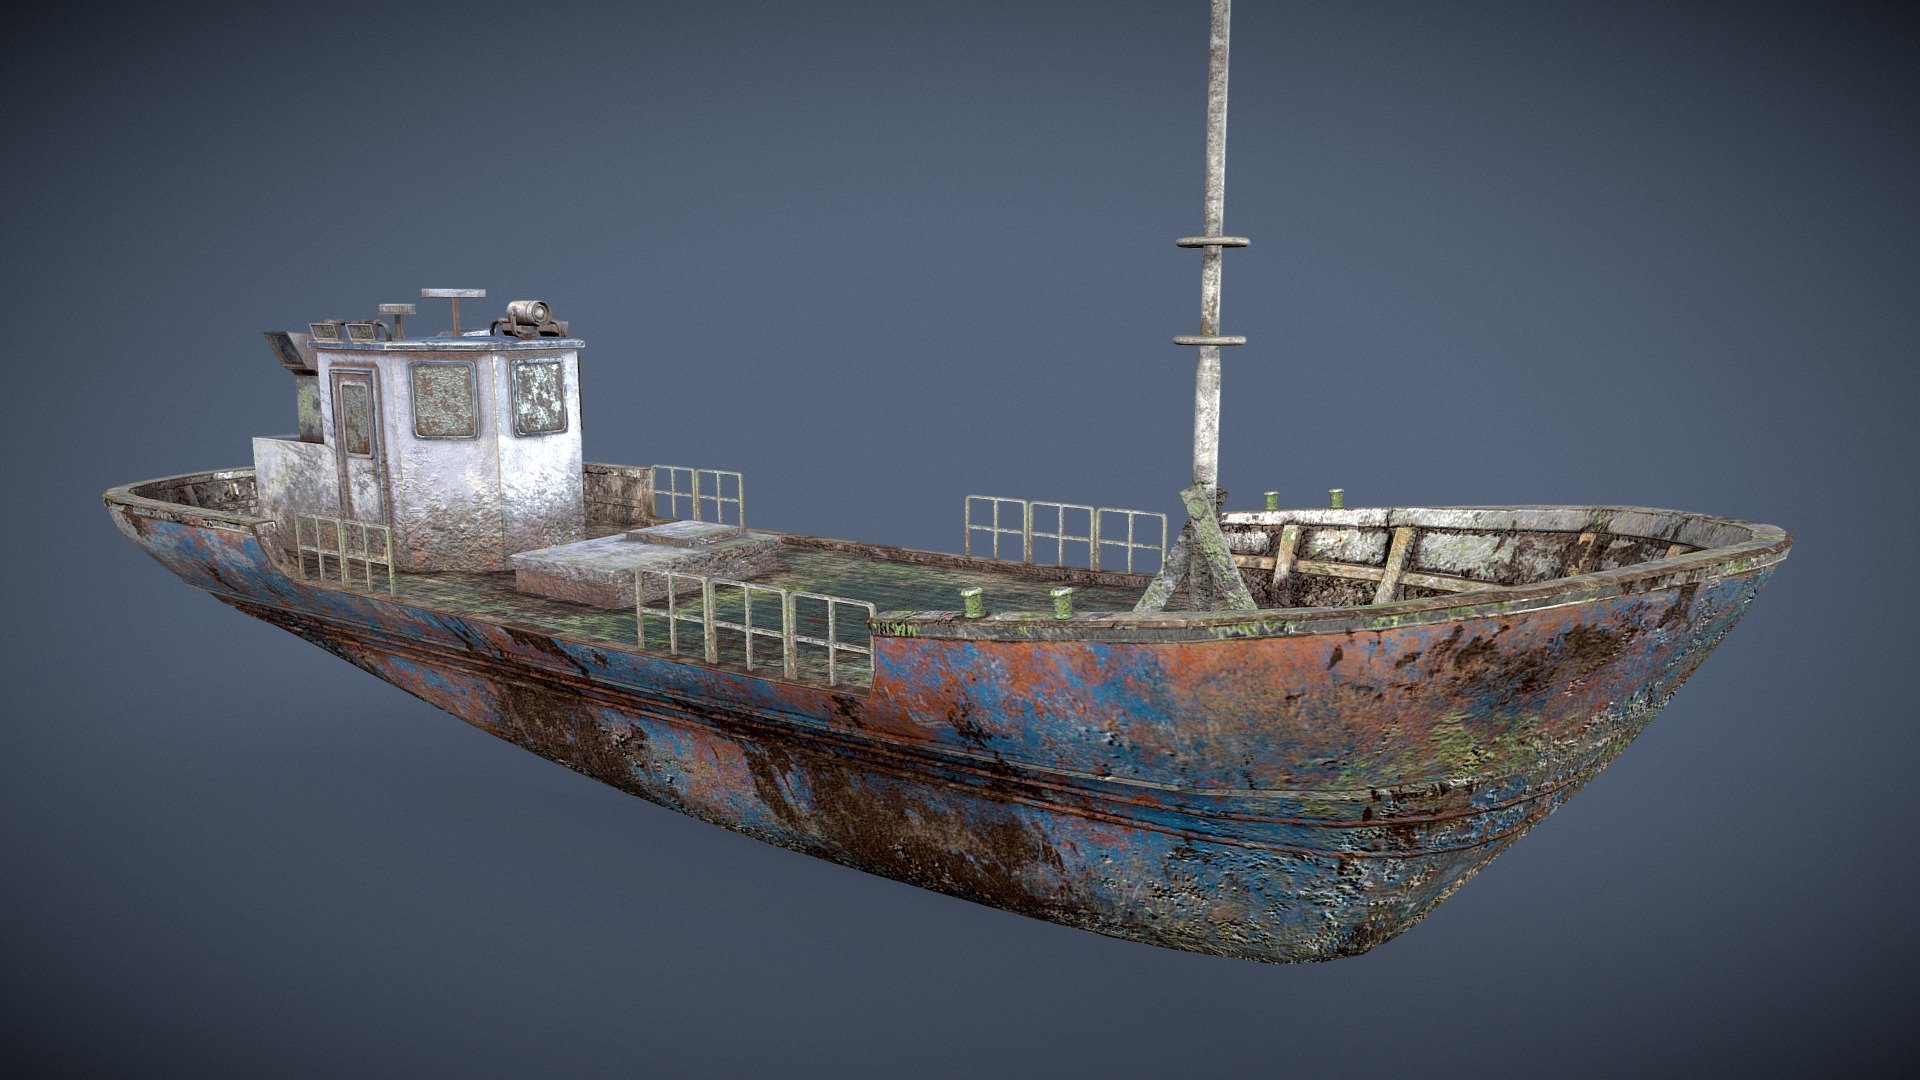 This asset was created for my personal project “Wreckage at Land’s End” (see link below). All assets are created to be used for a seaside setting, wreckage or otherwise. All models were created in Maya and Substance Painter.

https://www.artstation.com/artwork/zAEDn2 - Shipwreck - Vessel - 3D model by skygreen 3d model